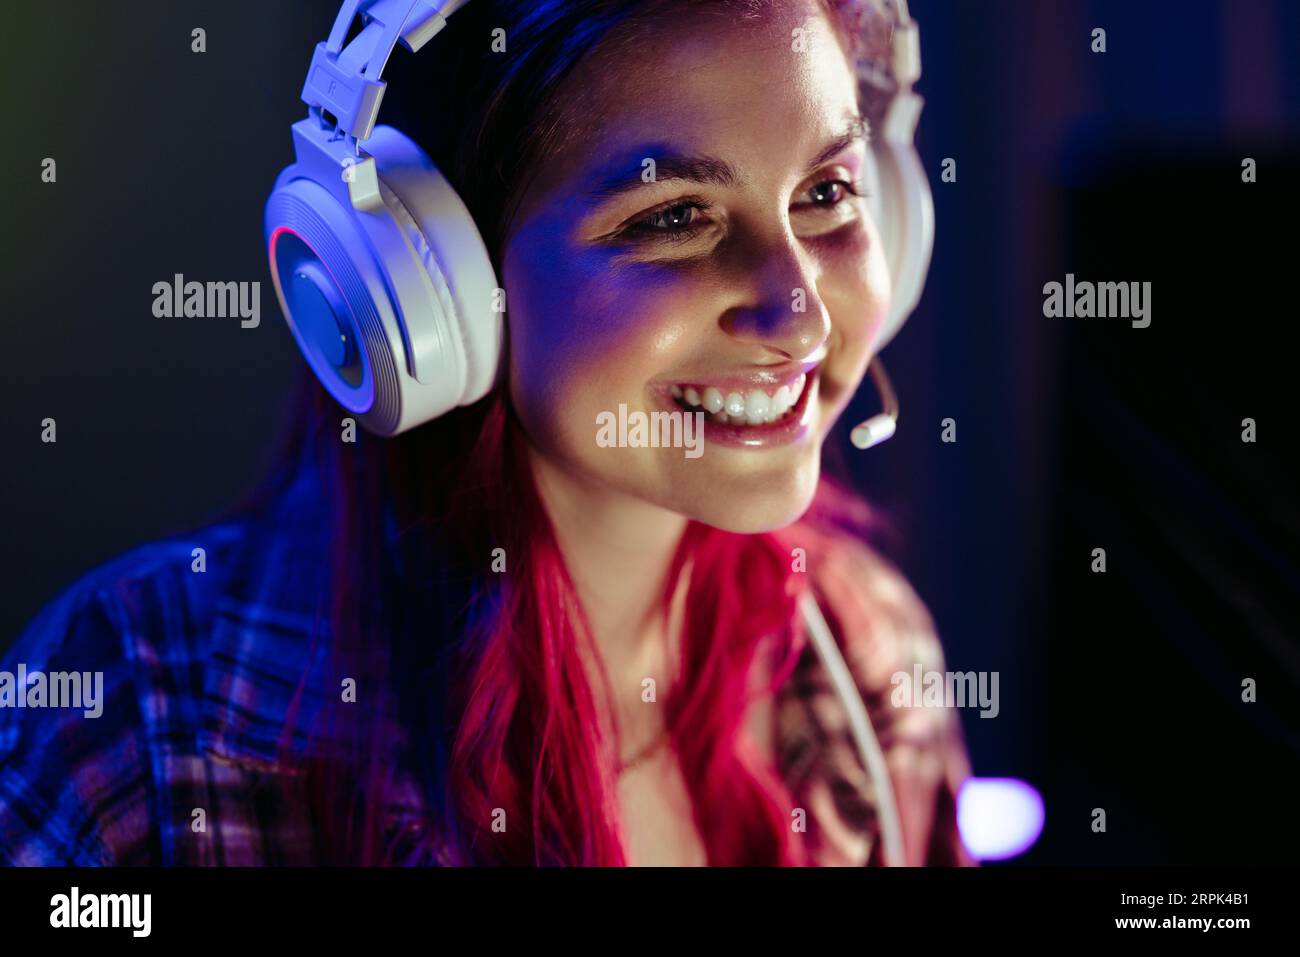 Female gamer navigates a video game with headphones on, streaming and sharing her passion with the online gaming community. With a headset on, she ful Stock Photo